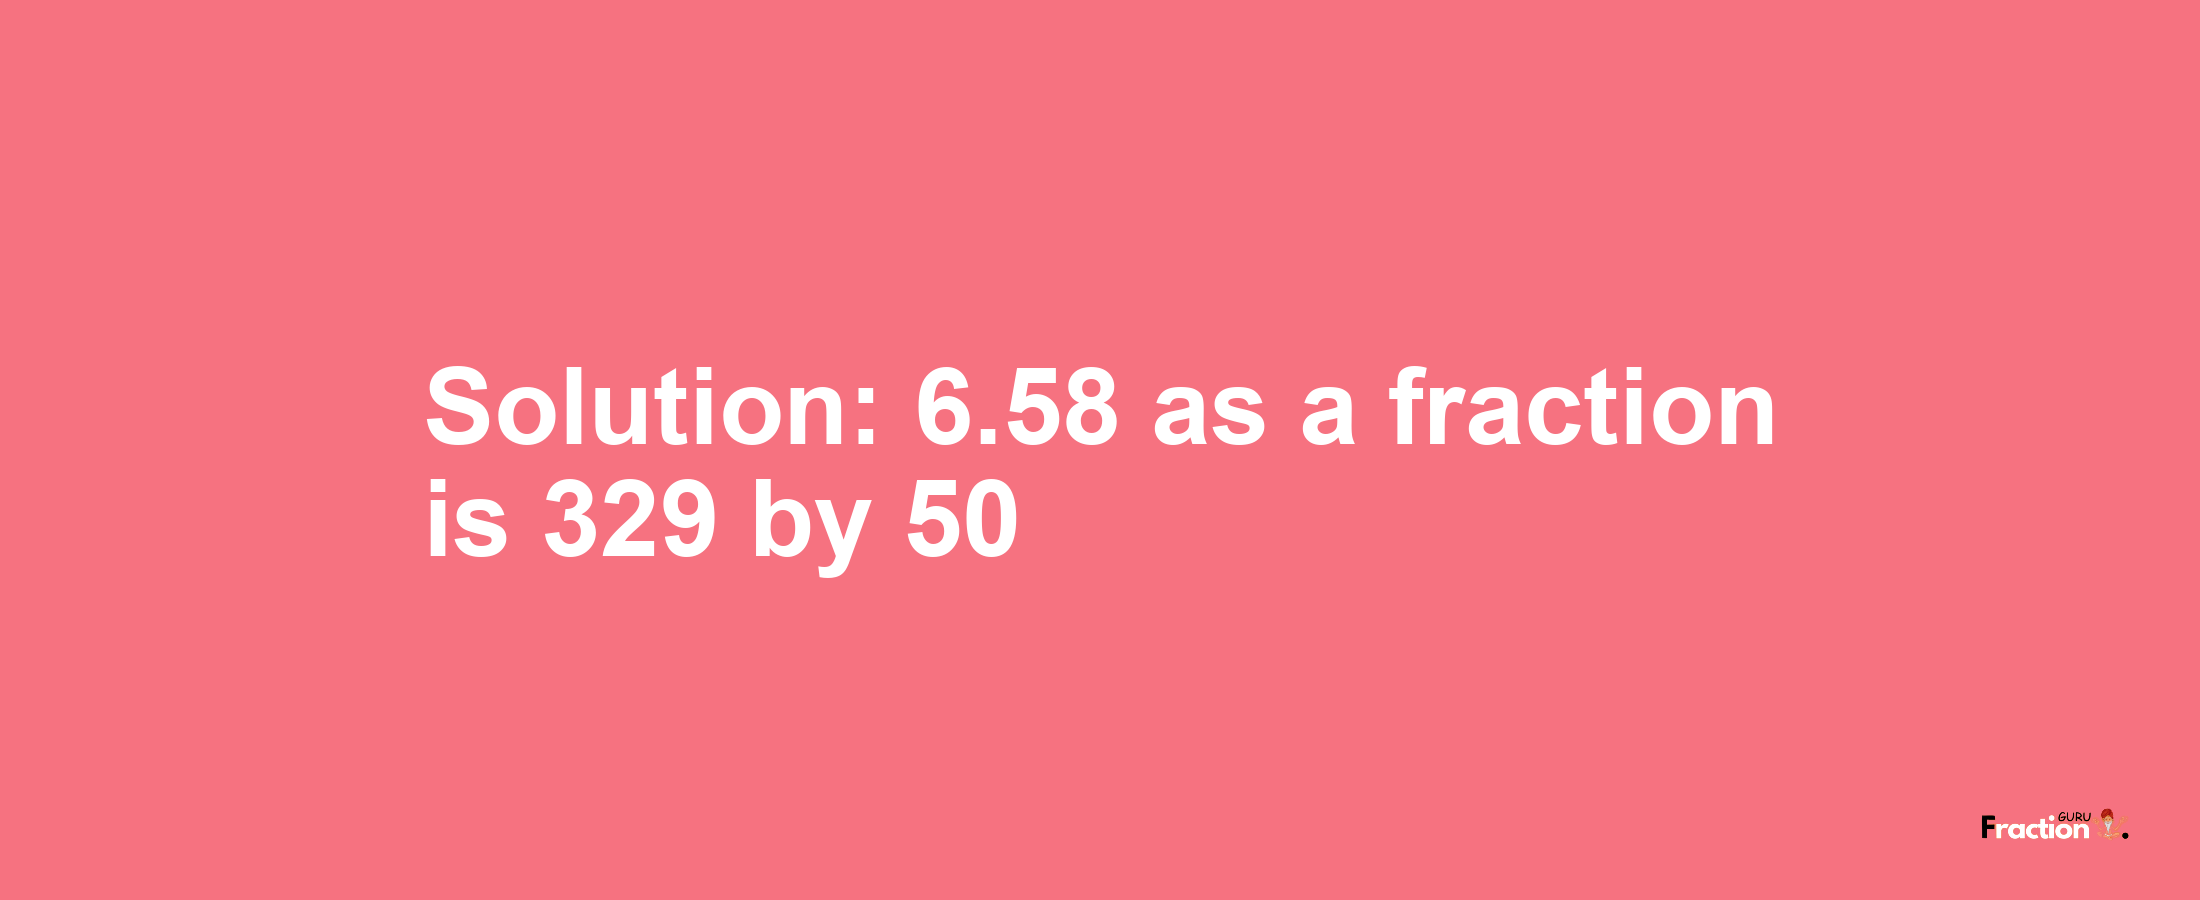 Solution:6.58 as a fraction is 329/50